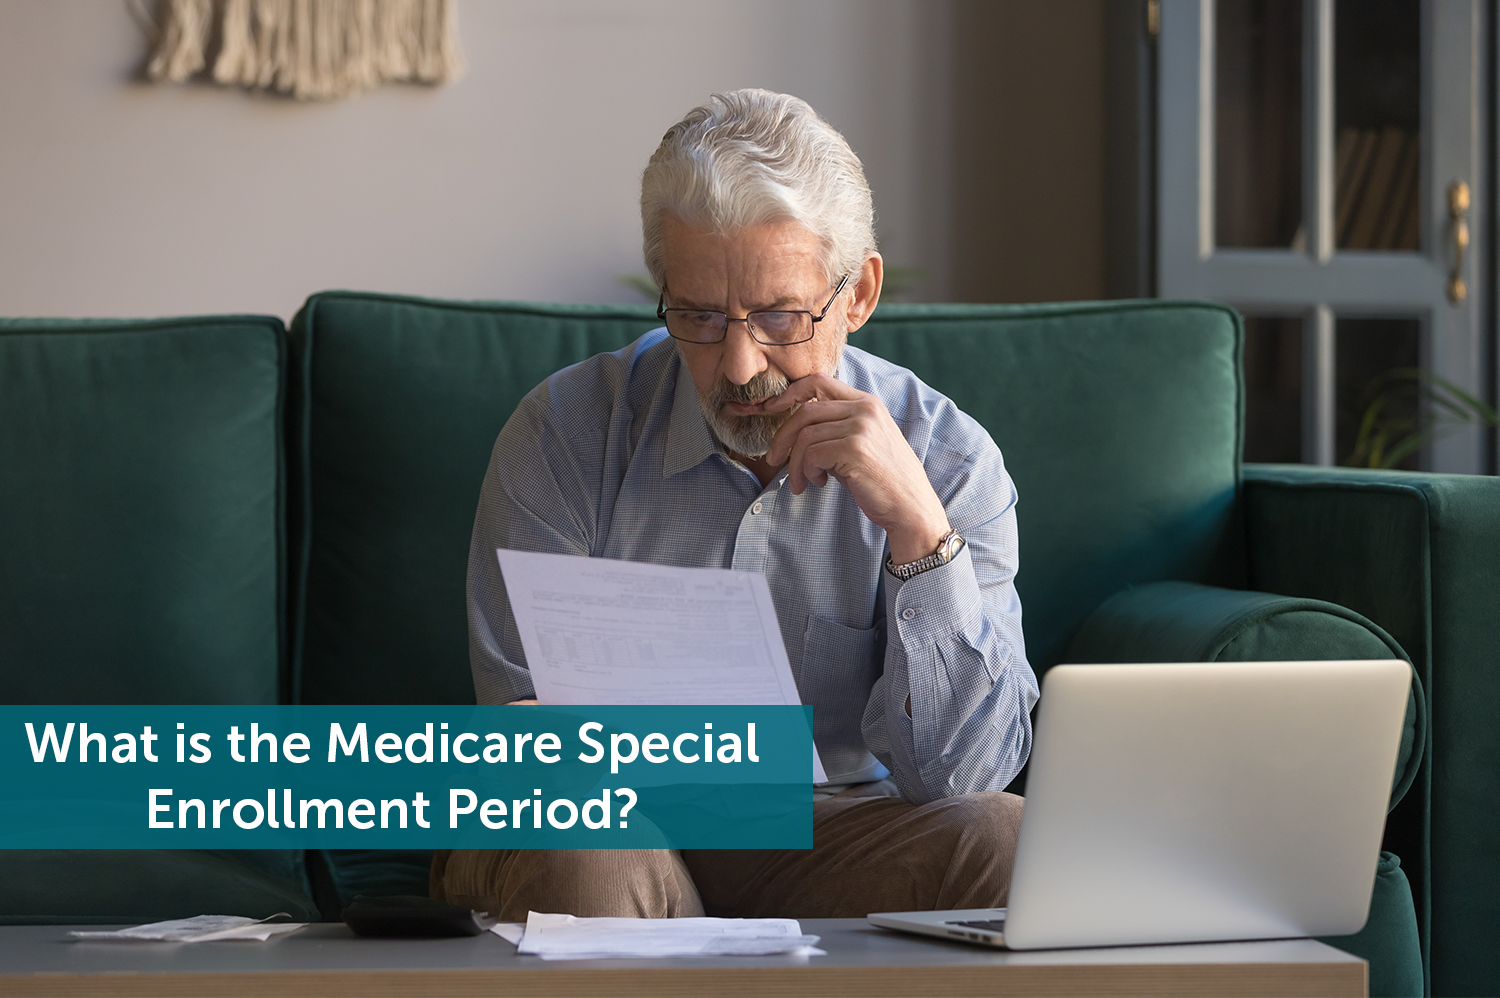 Elderly man sitting on a green couch looking at a piece of paper in front of an open laptop, wondering how Medicare Special Enrollment Period works.